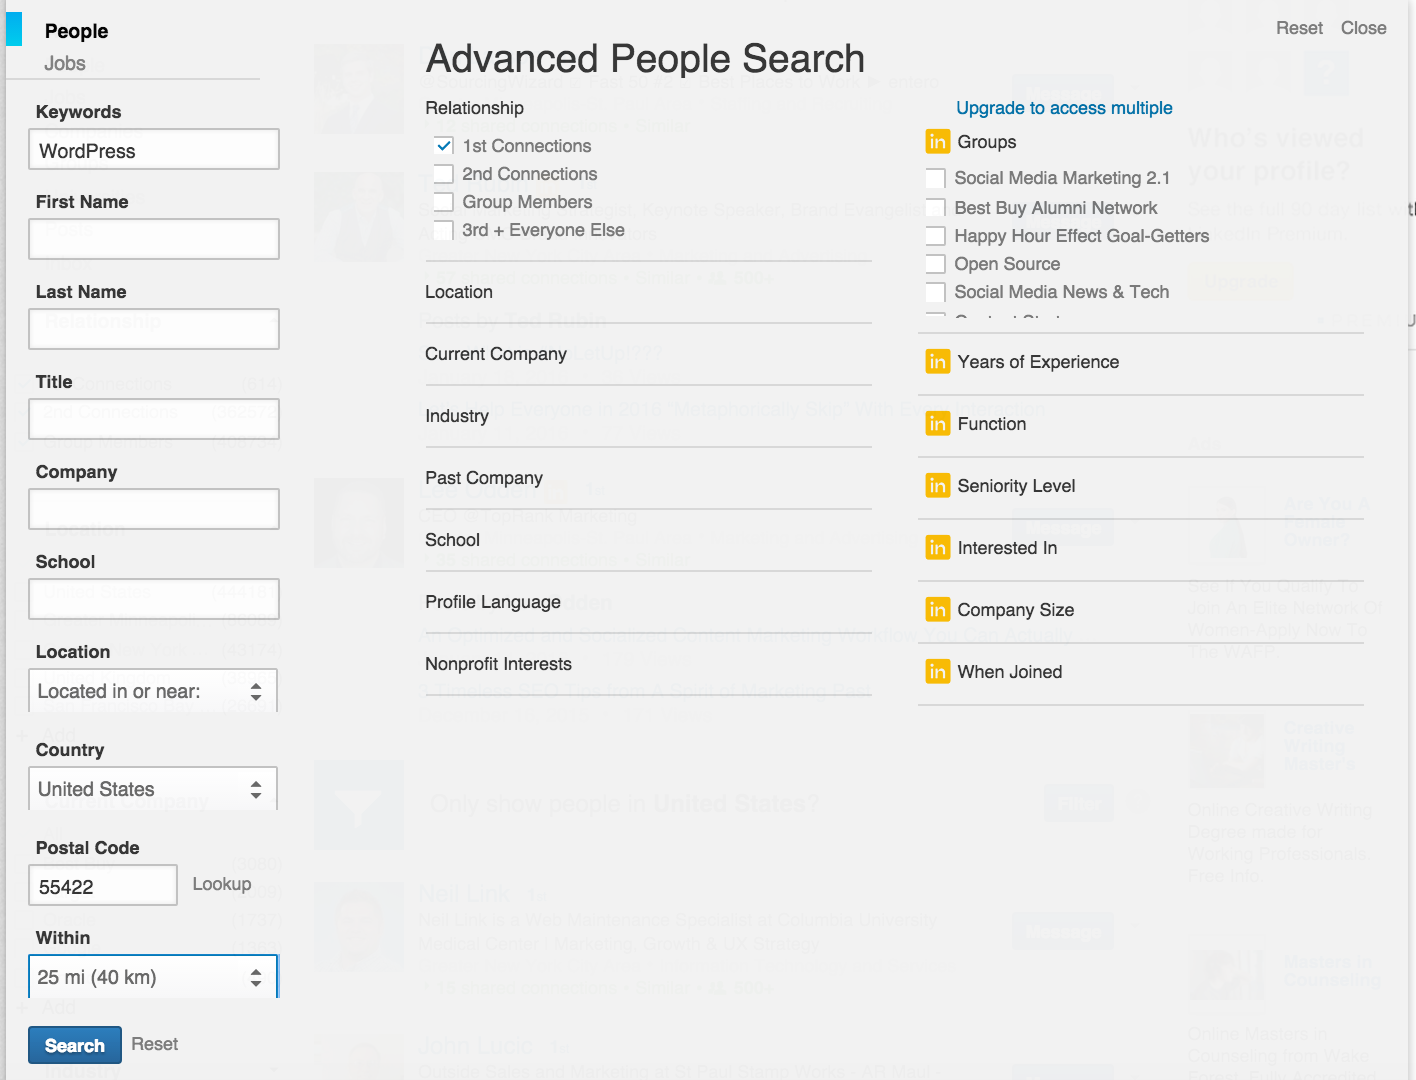 Use the LinkedIn Advanced People Search function to send targeted invitations for your event.